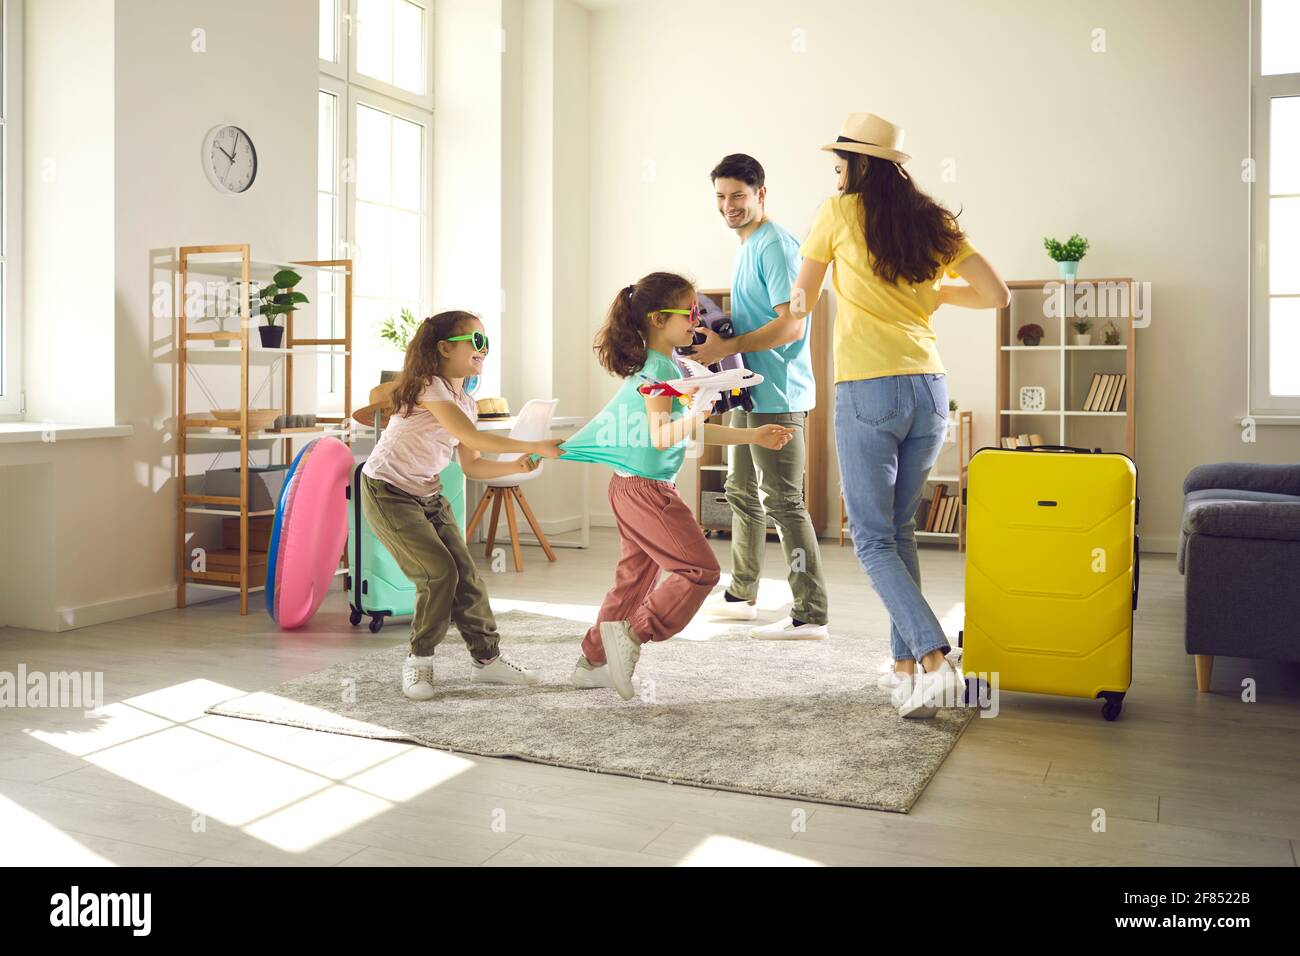 Happy children and mother having fun while getting ready for family holiday trip Stock Photo